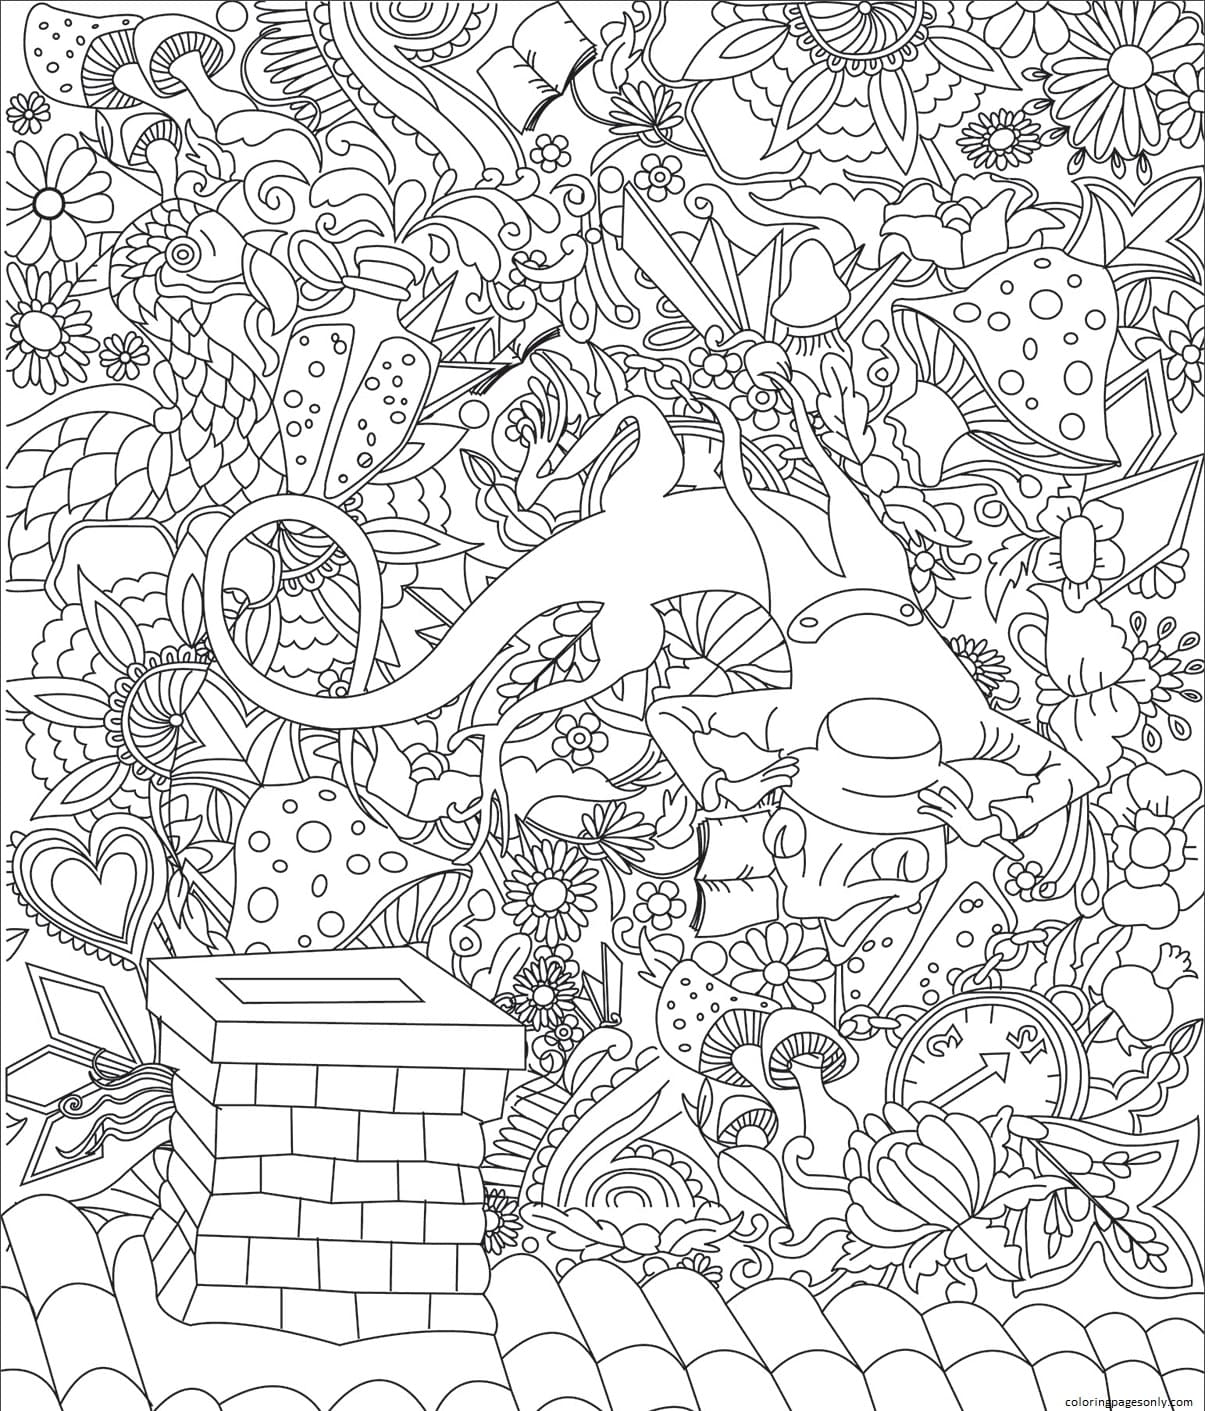 Bill the Lizard Pops Coloring Page